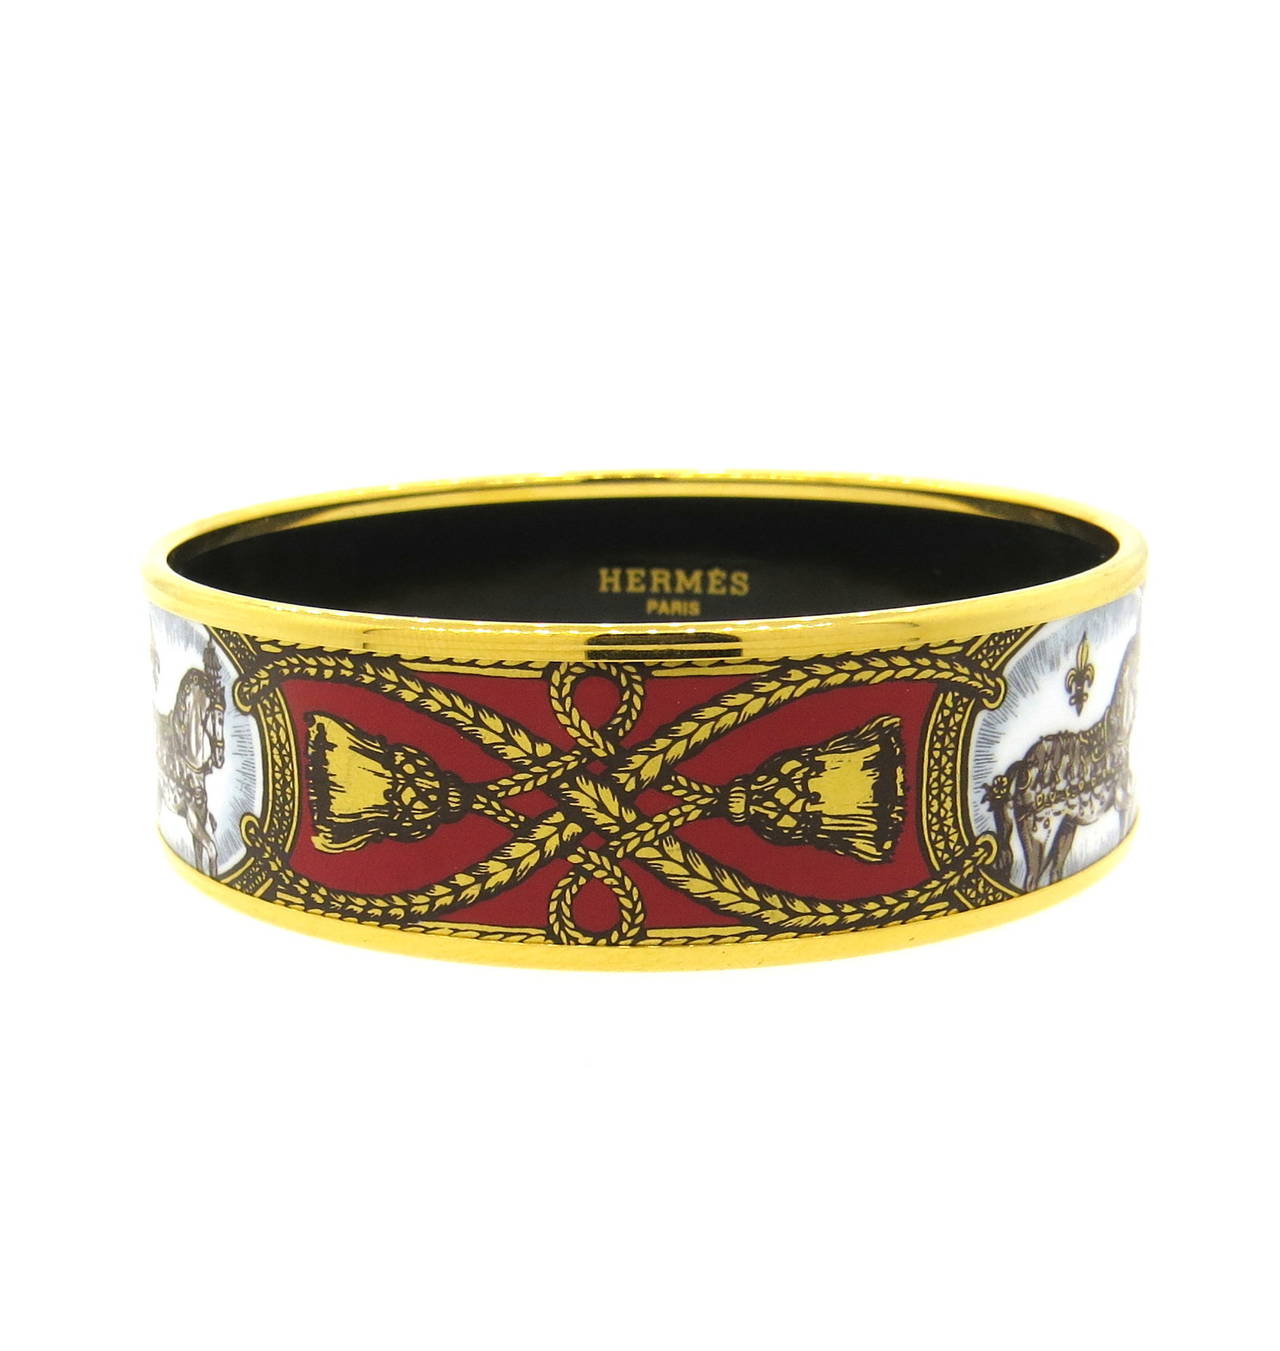 A base metal bracelet covered in printed enamel with gold plating.  Crafted by Hermes, the bracelet measures 19.7mm in width and has an interior diameter of 62mm.  The weight of the piece is 36.4 grams.